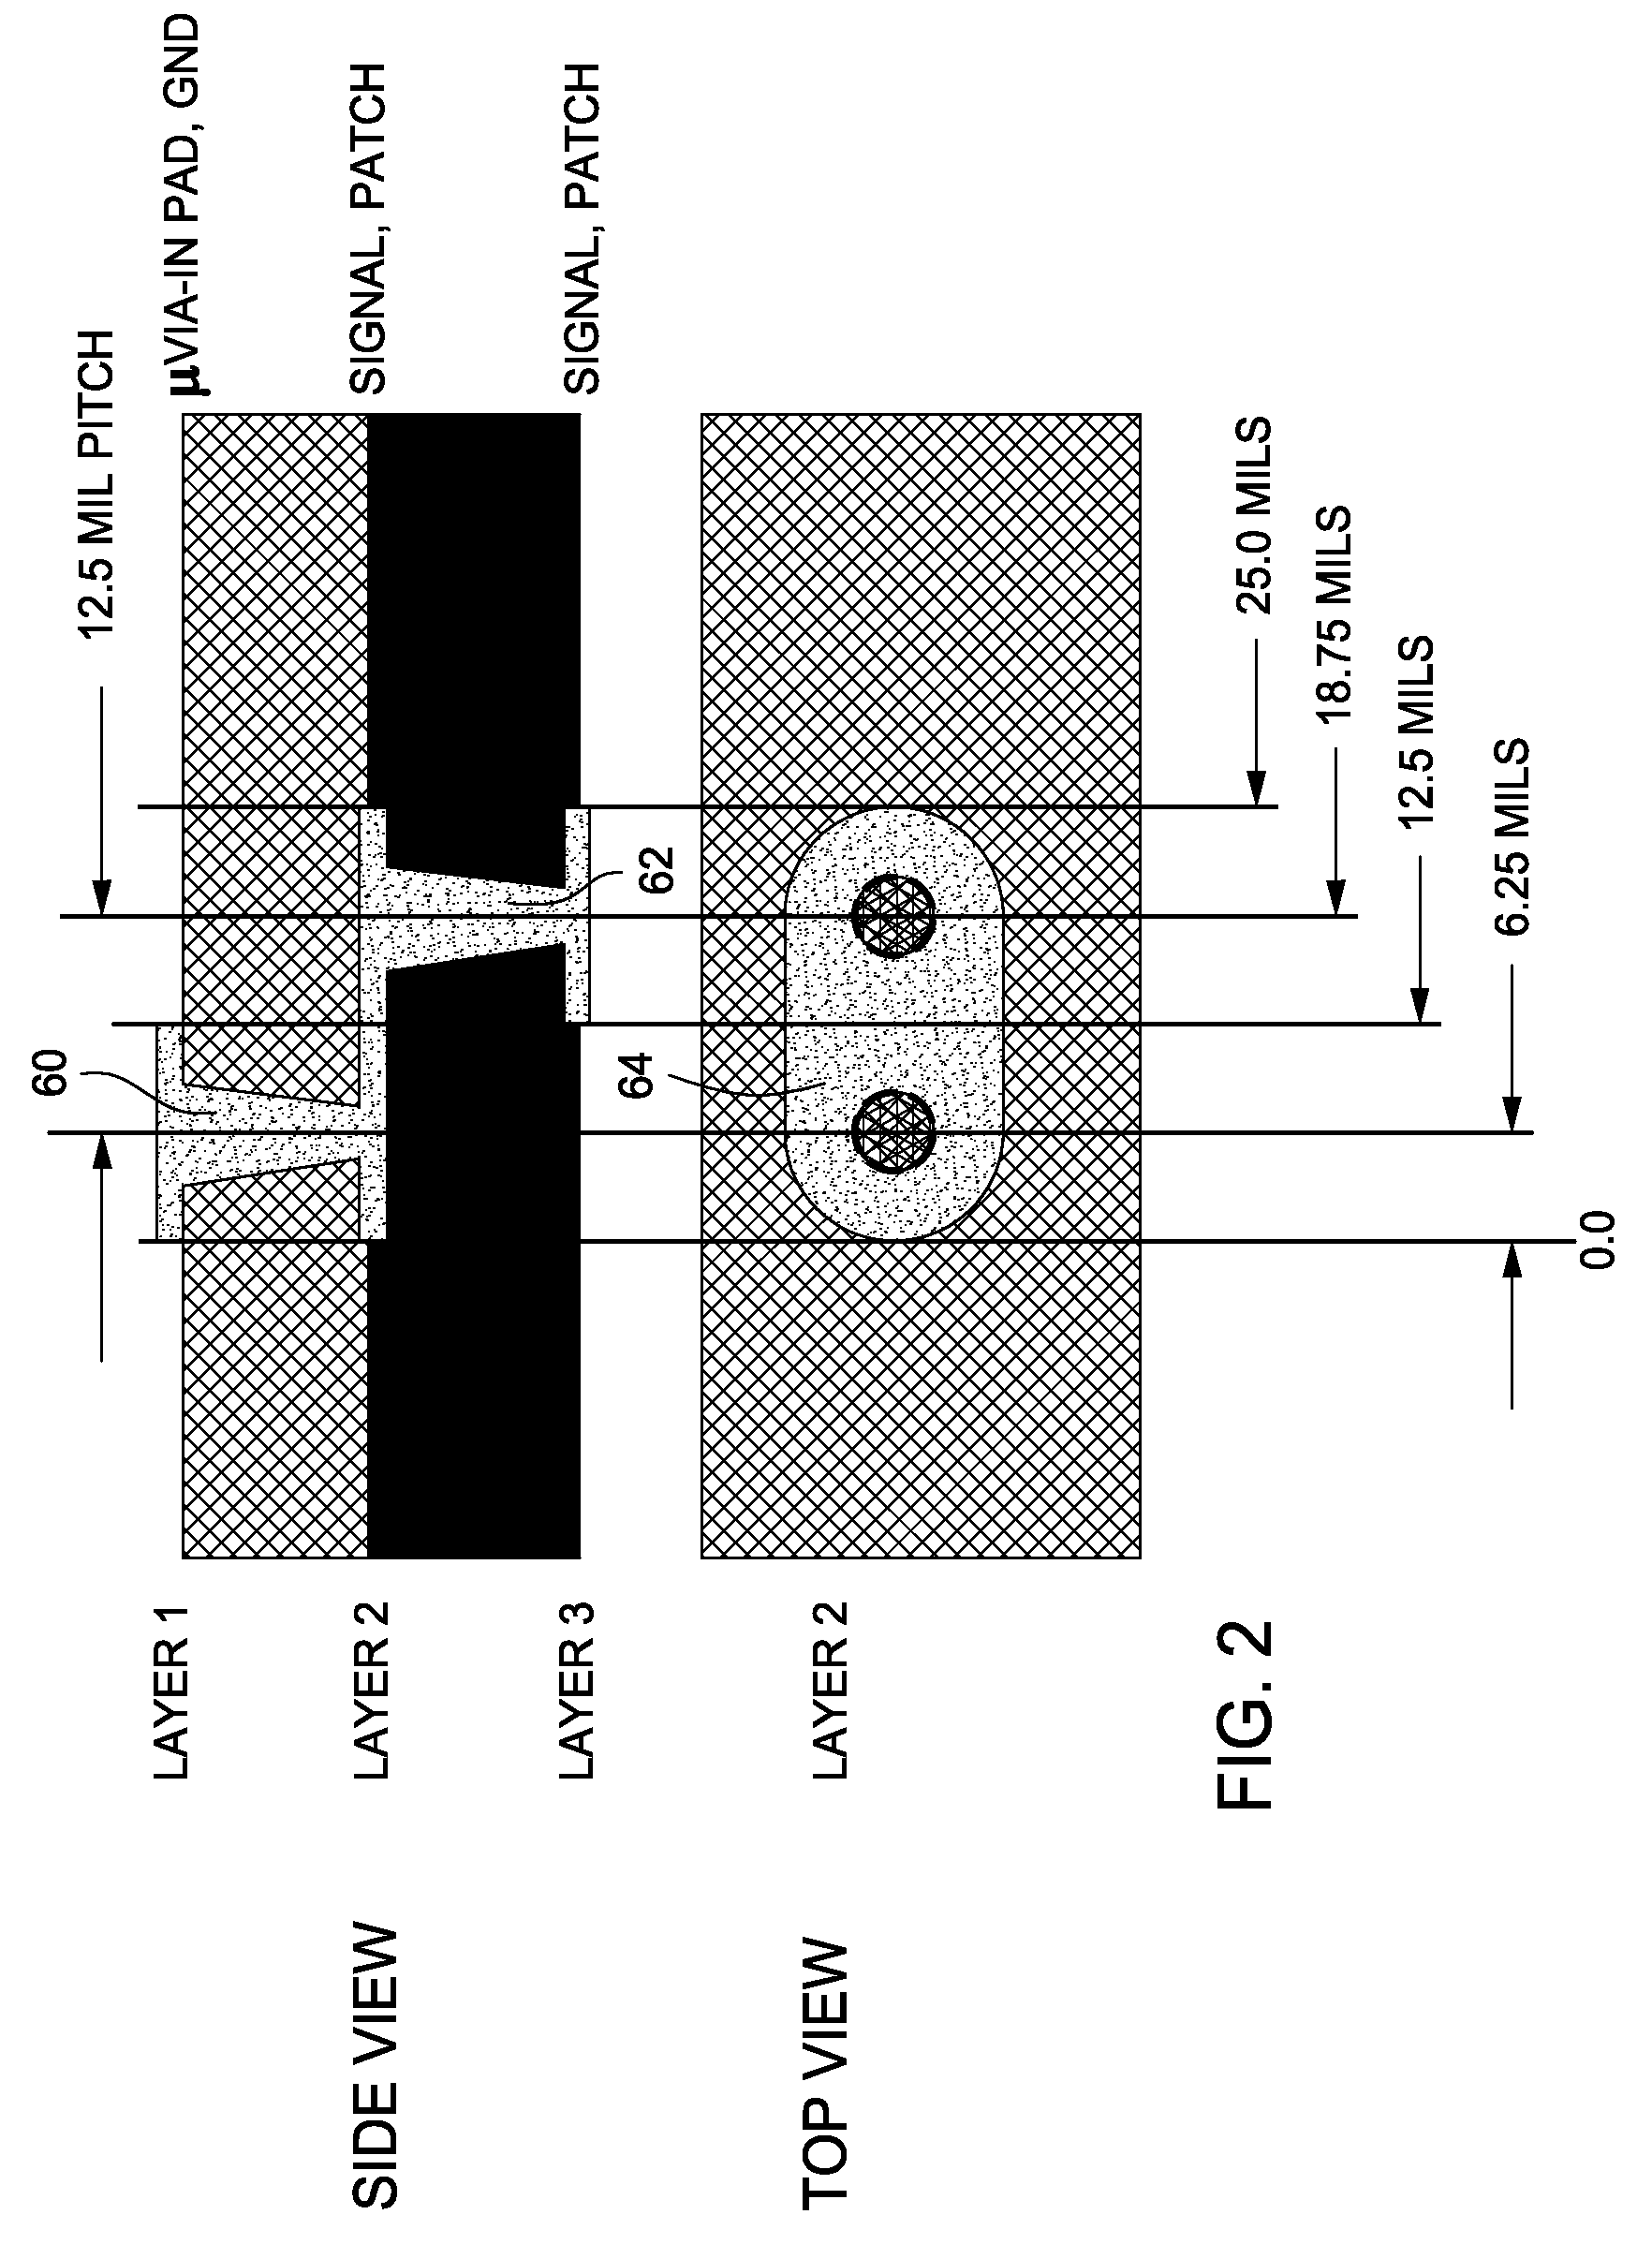 Connecting an integrated circuit on a surface layer of a printed circuit board